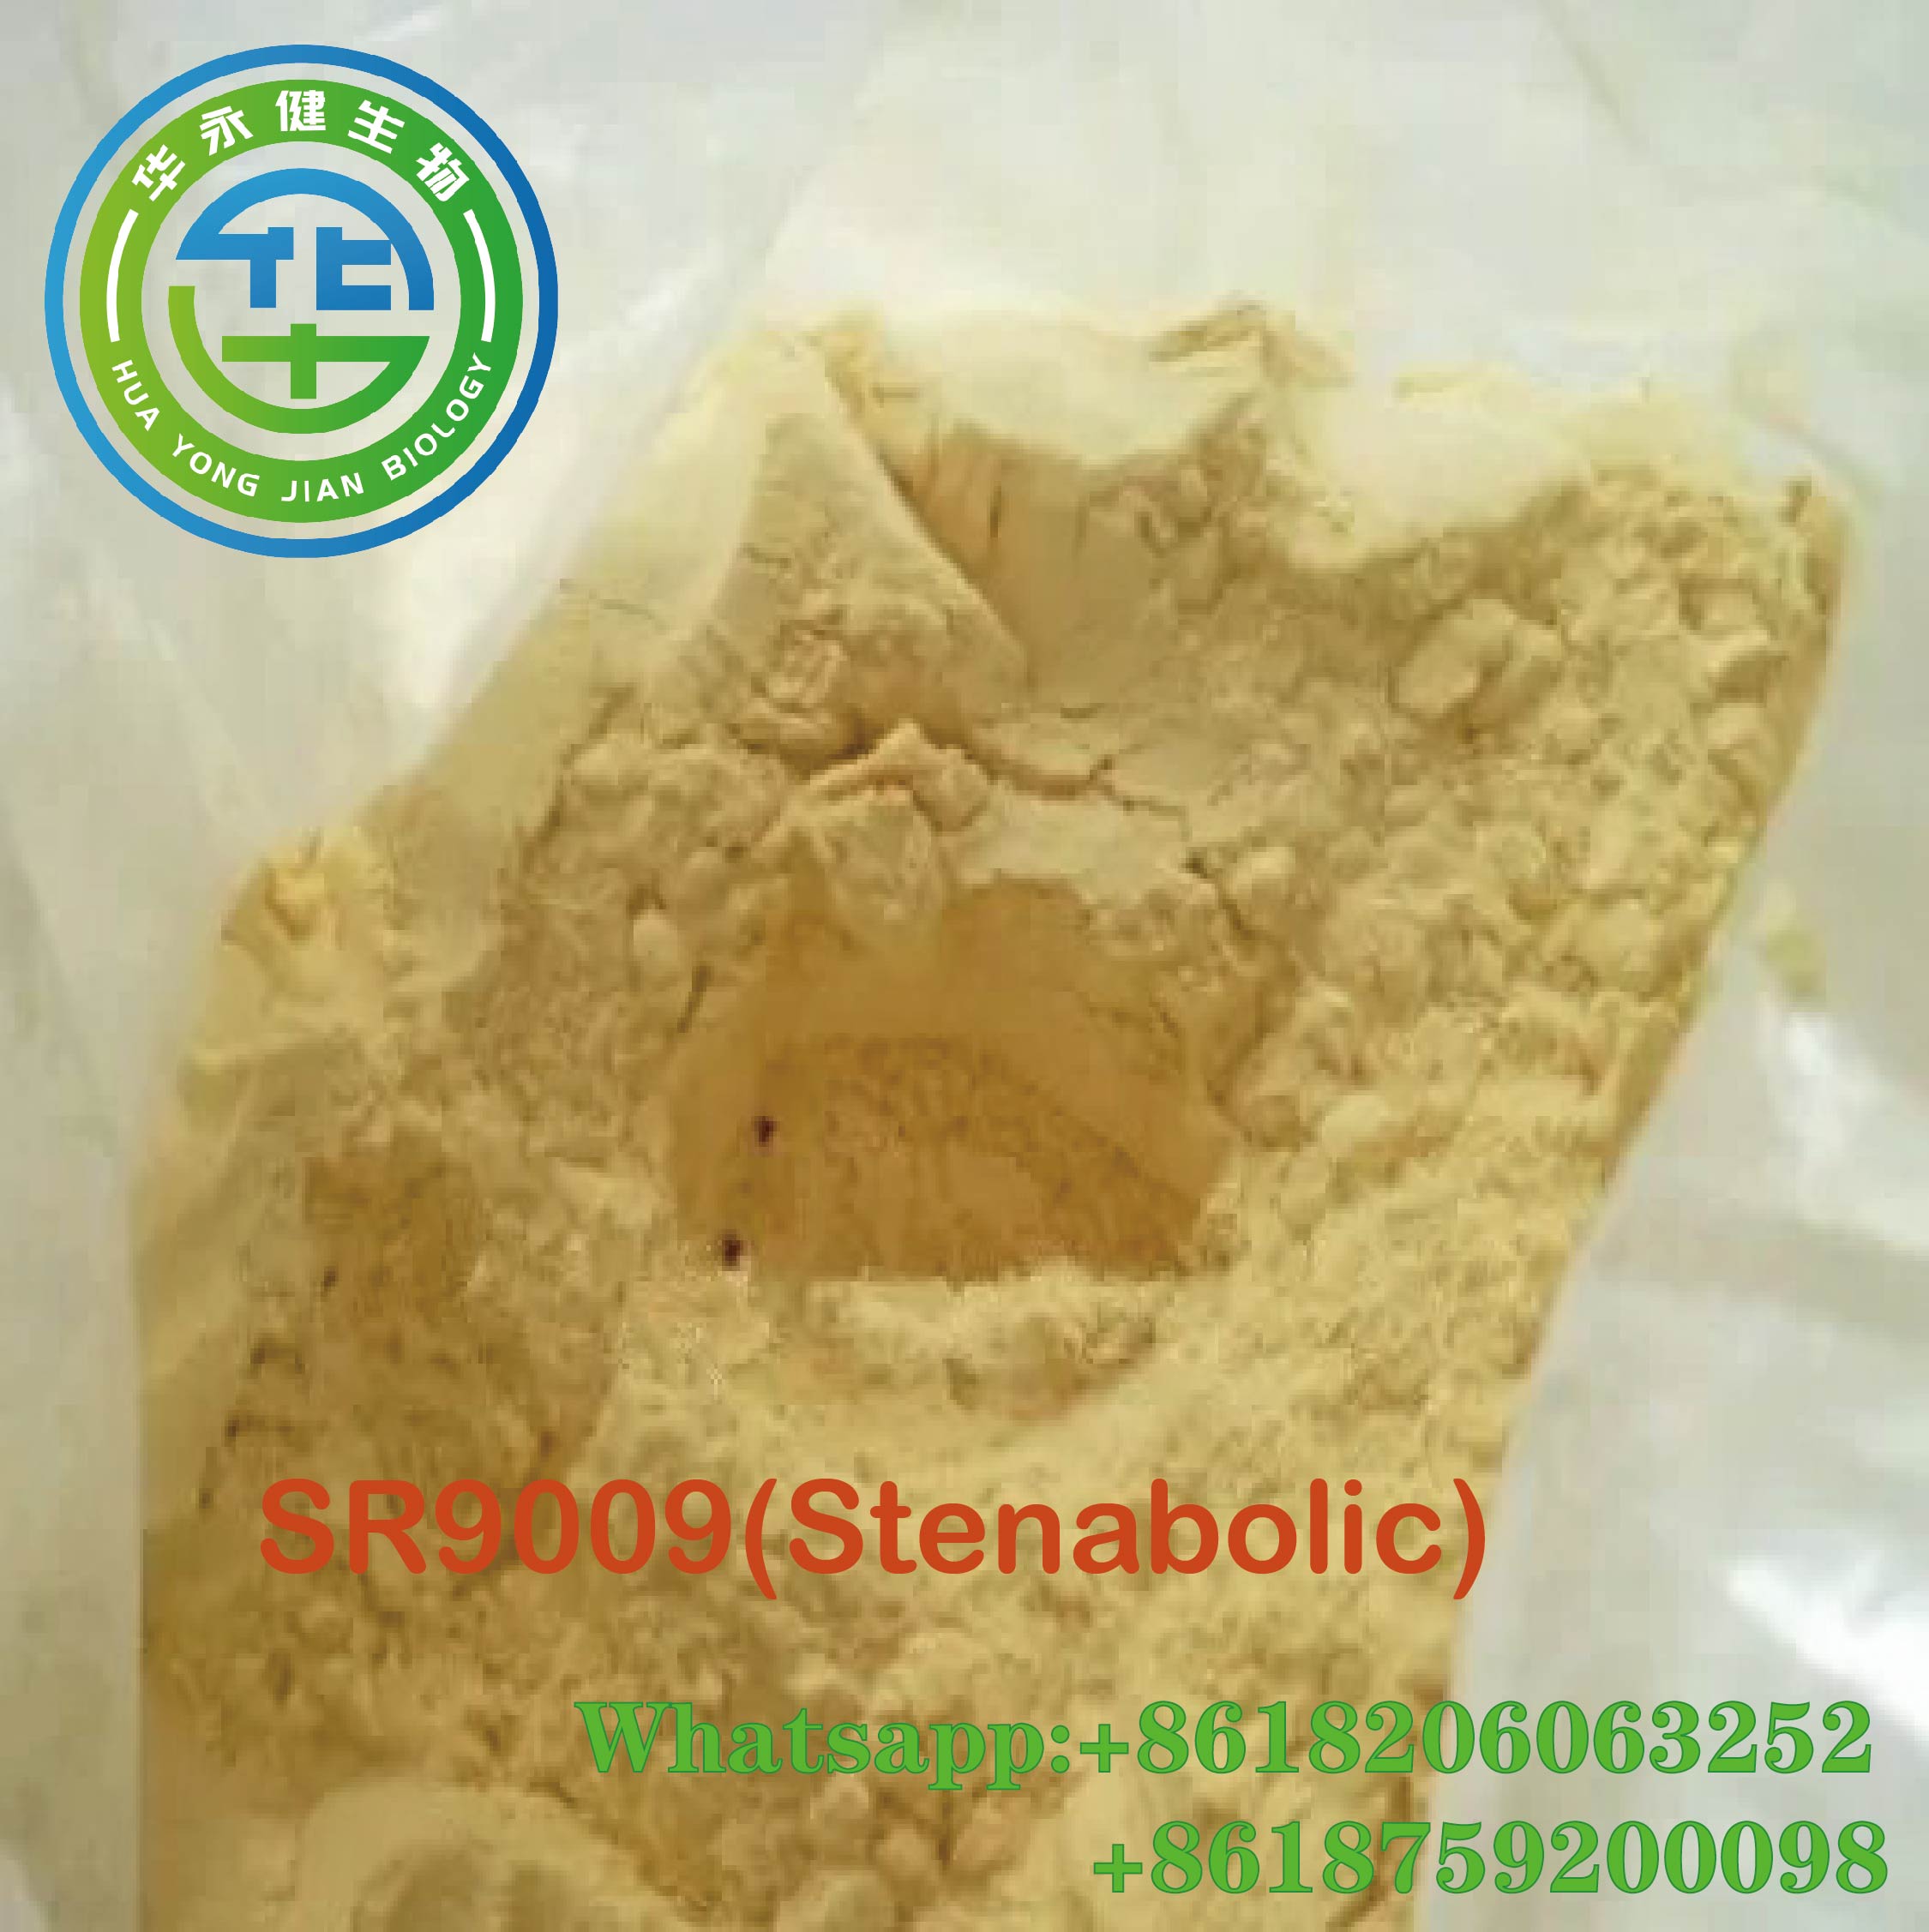 Stenabolic Purity 99% Human Raw Steroid Powder Sarms SR9009 for Muscle Building CasNO.1379686-30-2